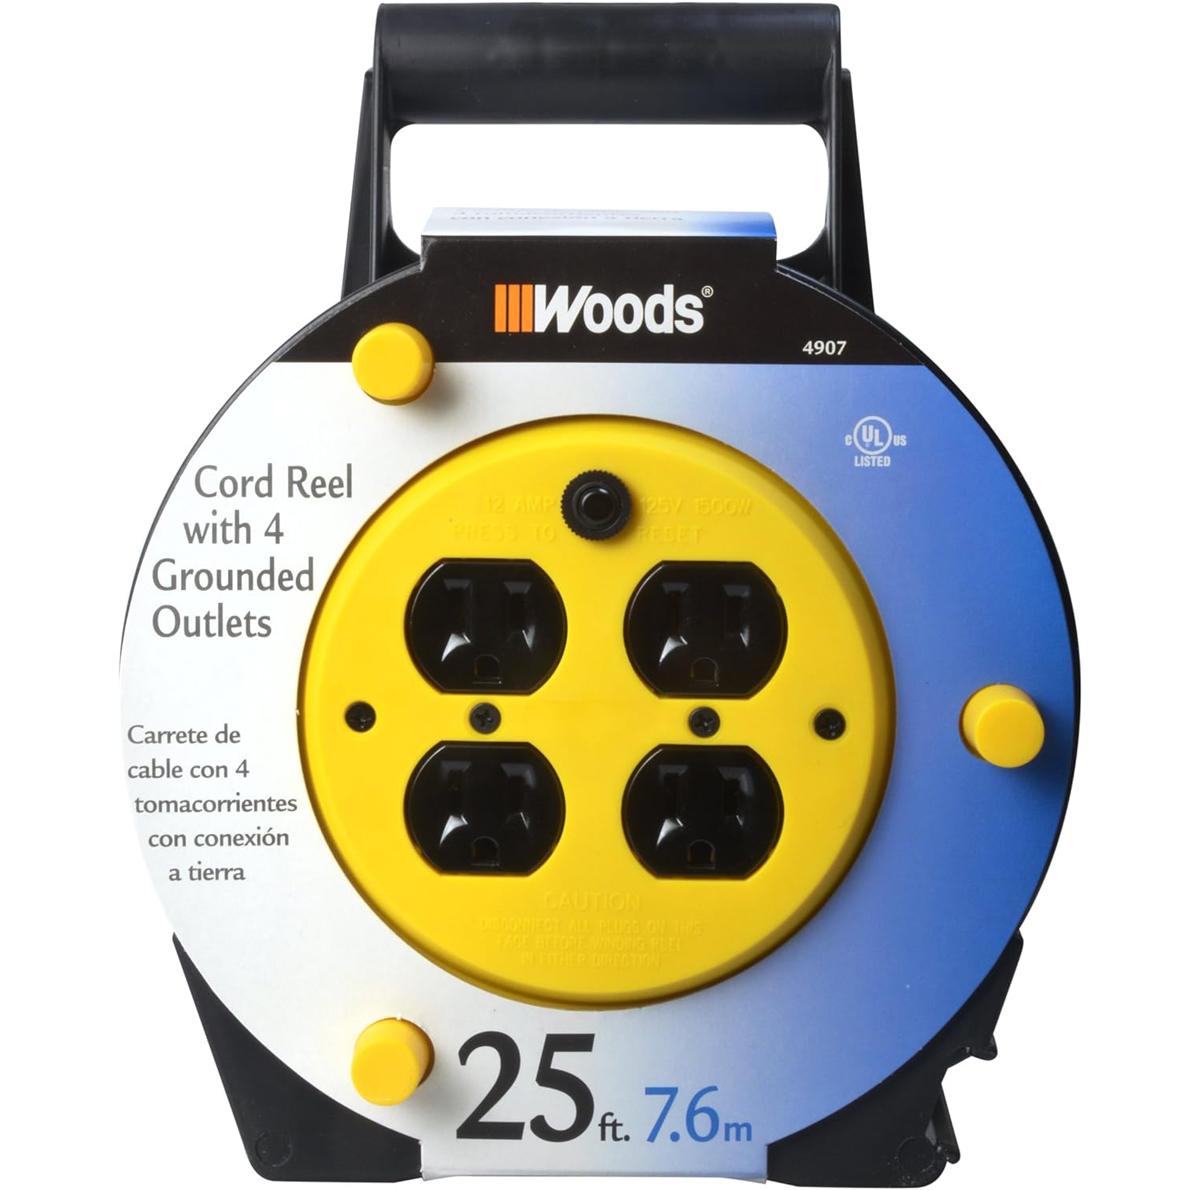 Woods 4907 Extension Cord Reel with 4-Outlets and Circuit Breaker for $14.96